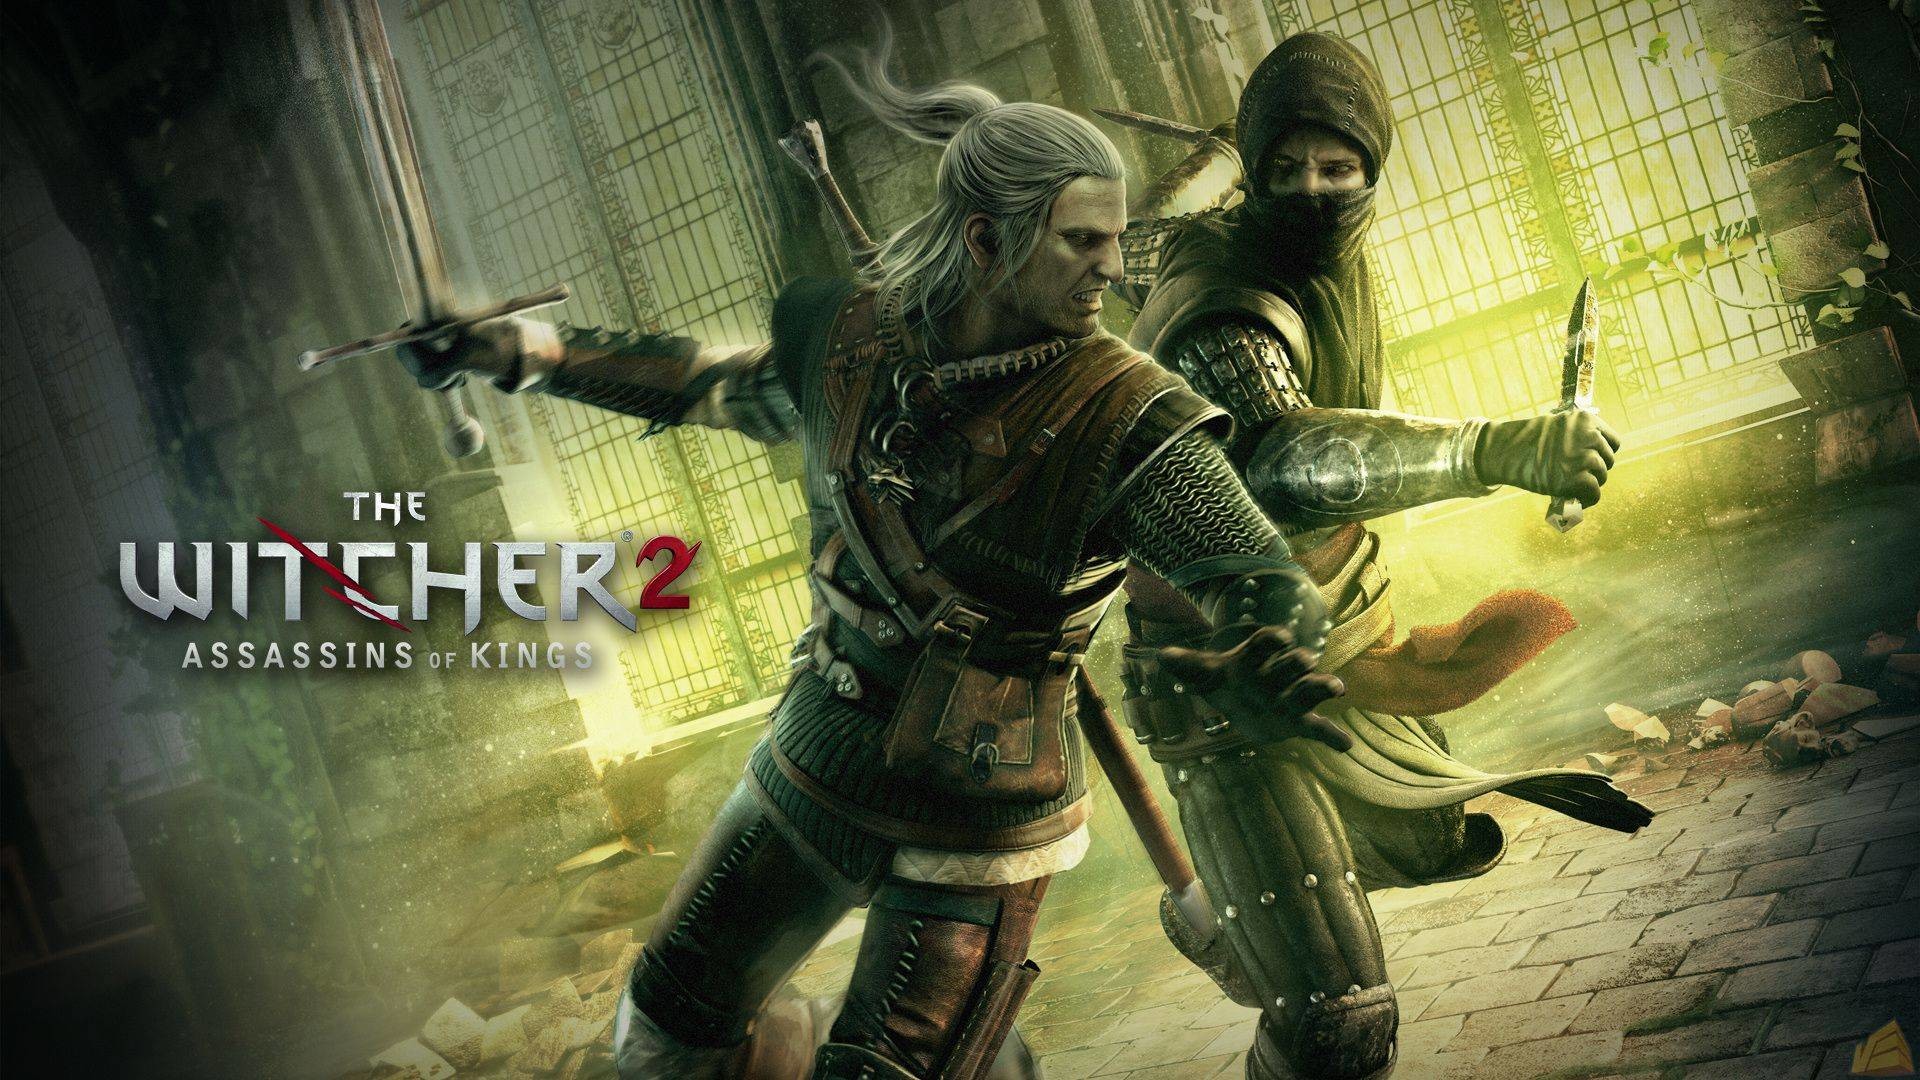 1920x1080 The Witcher 2. Download The Witcher wallpaper